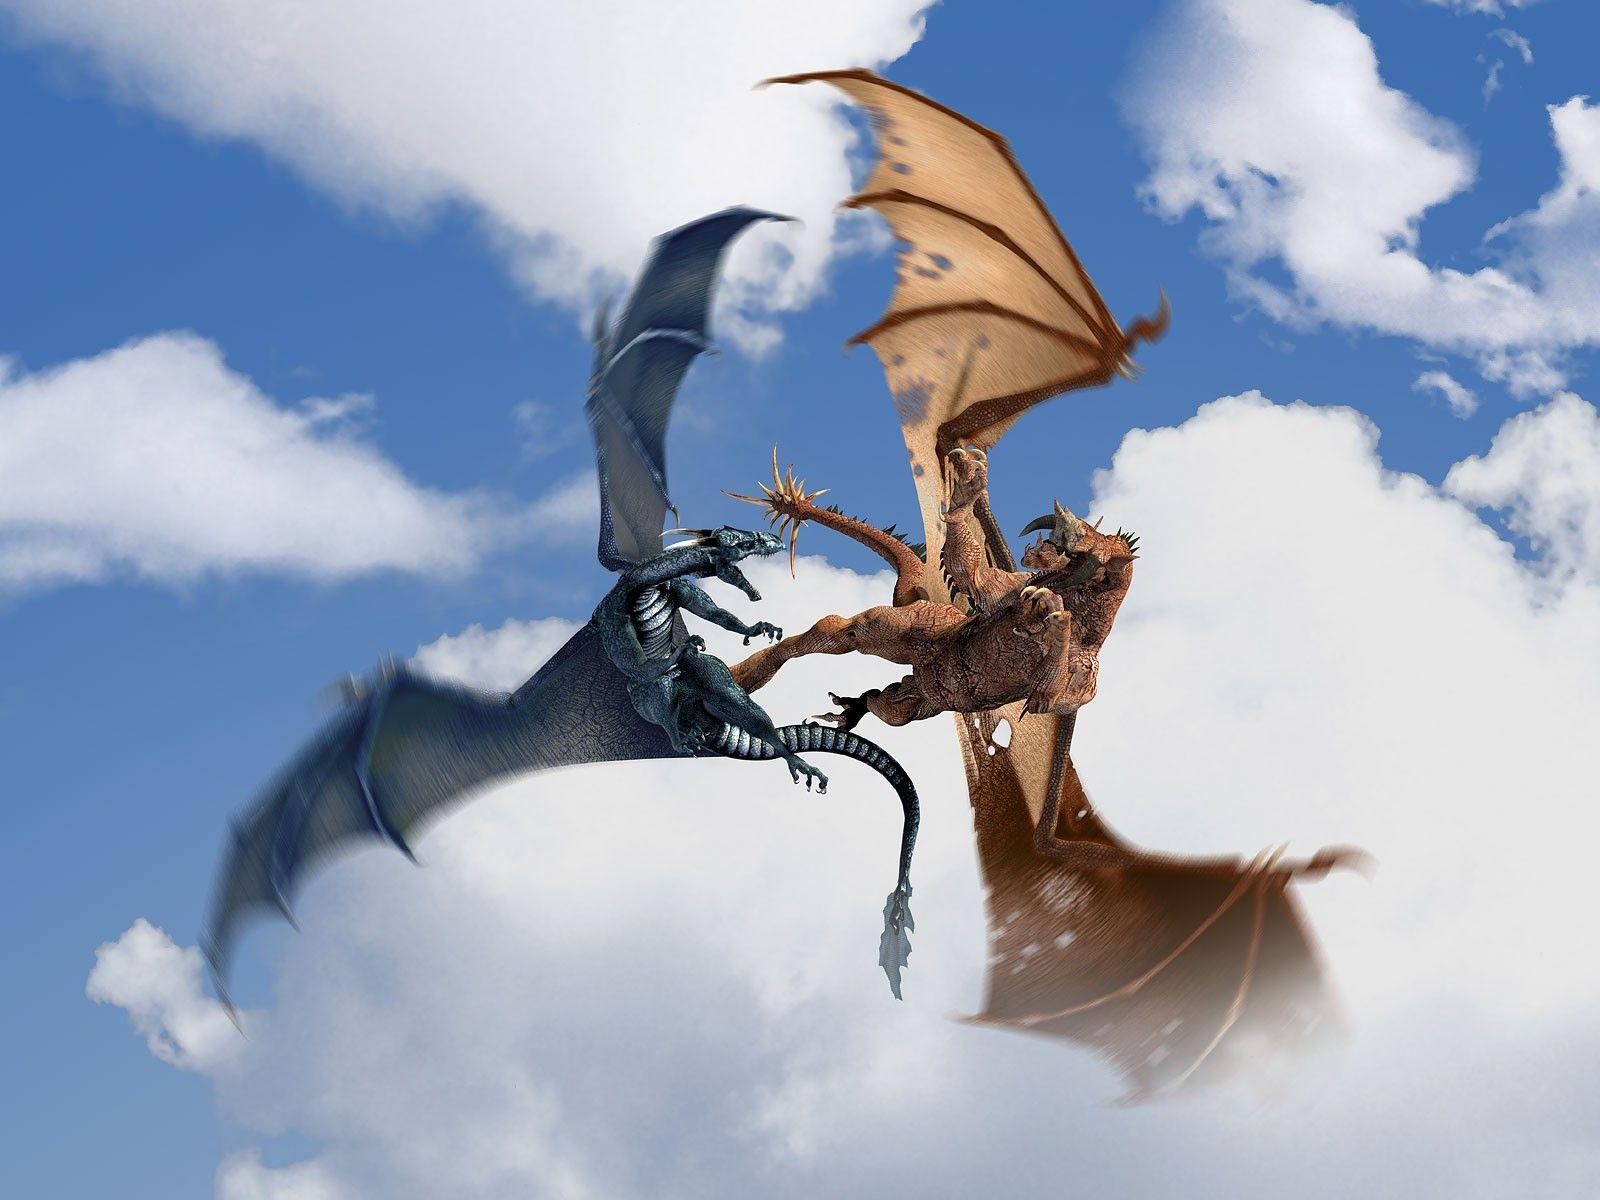 Two Awesome Dragons Fighting (1600×1200). Dragons